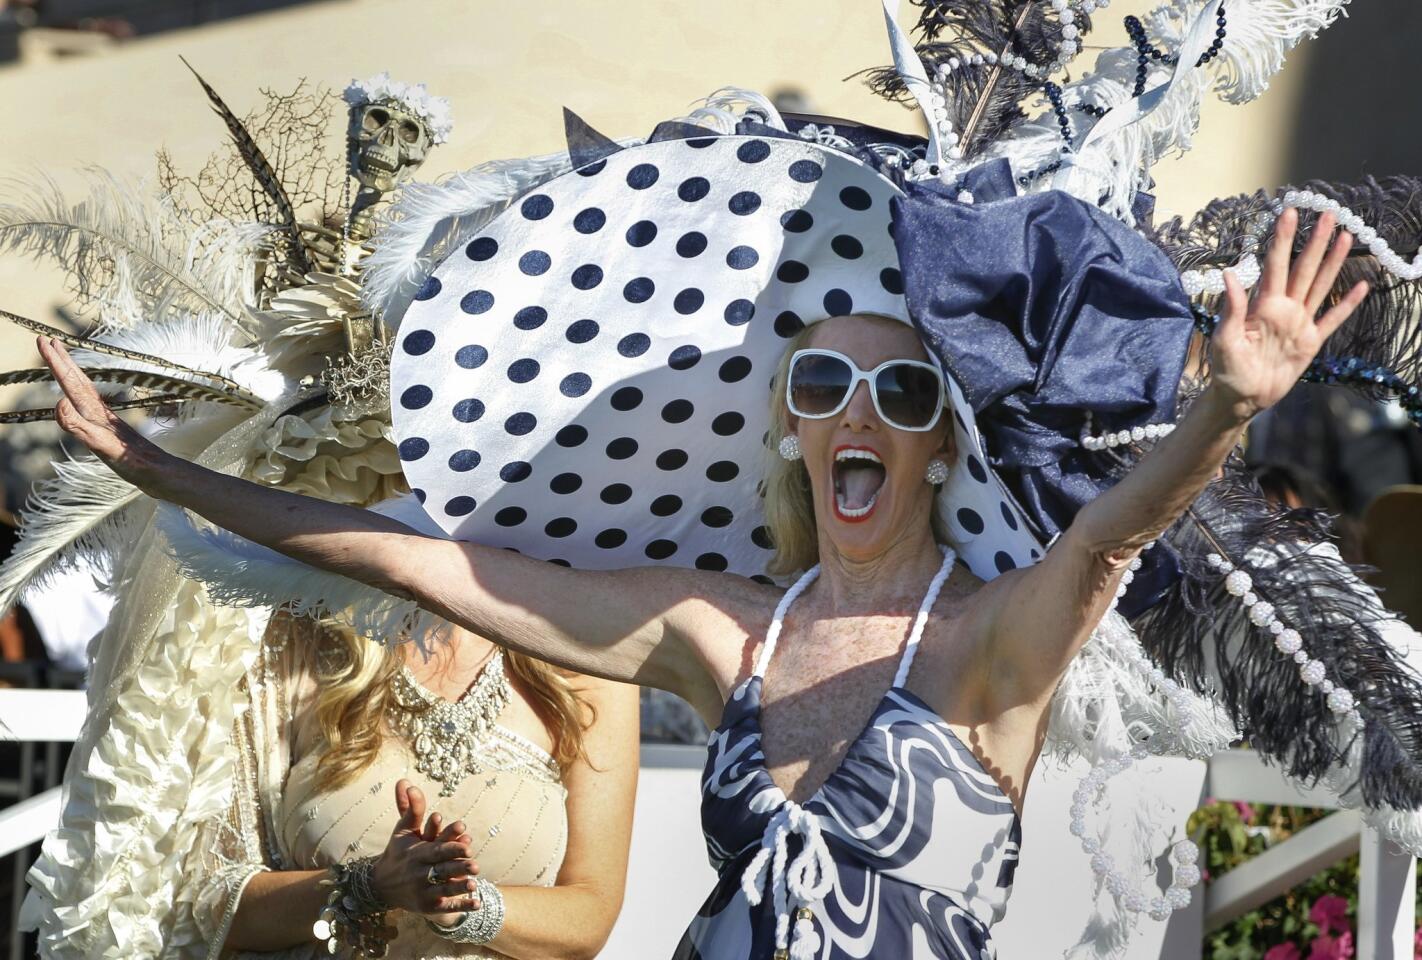 Belinda Berry, from Walnut Creek, celebrates after it was announced she had won the Grand Prize for her hat she calls "Go Navy".